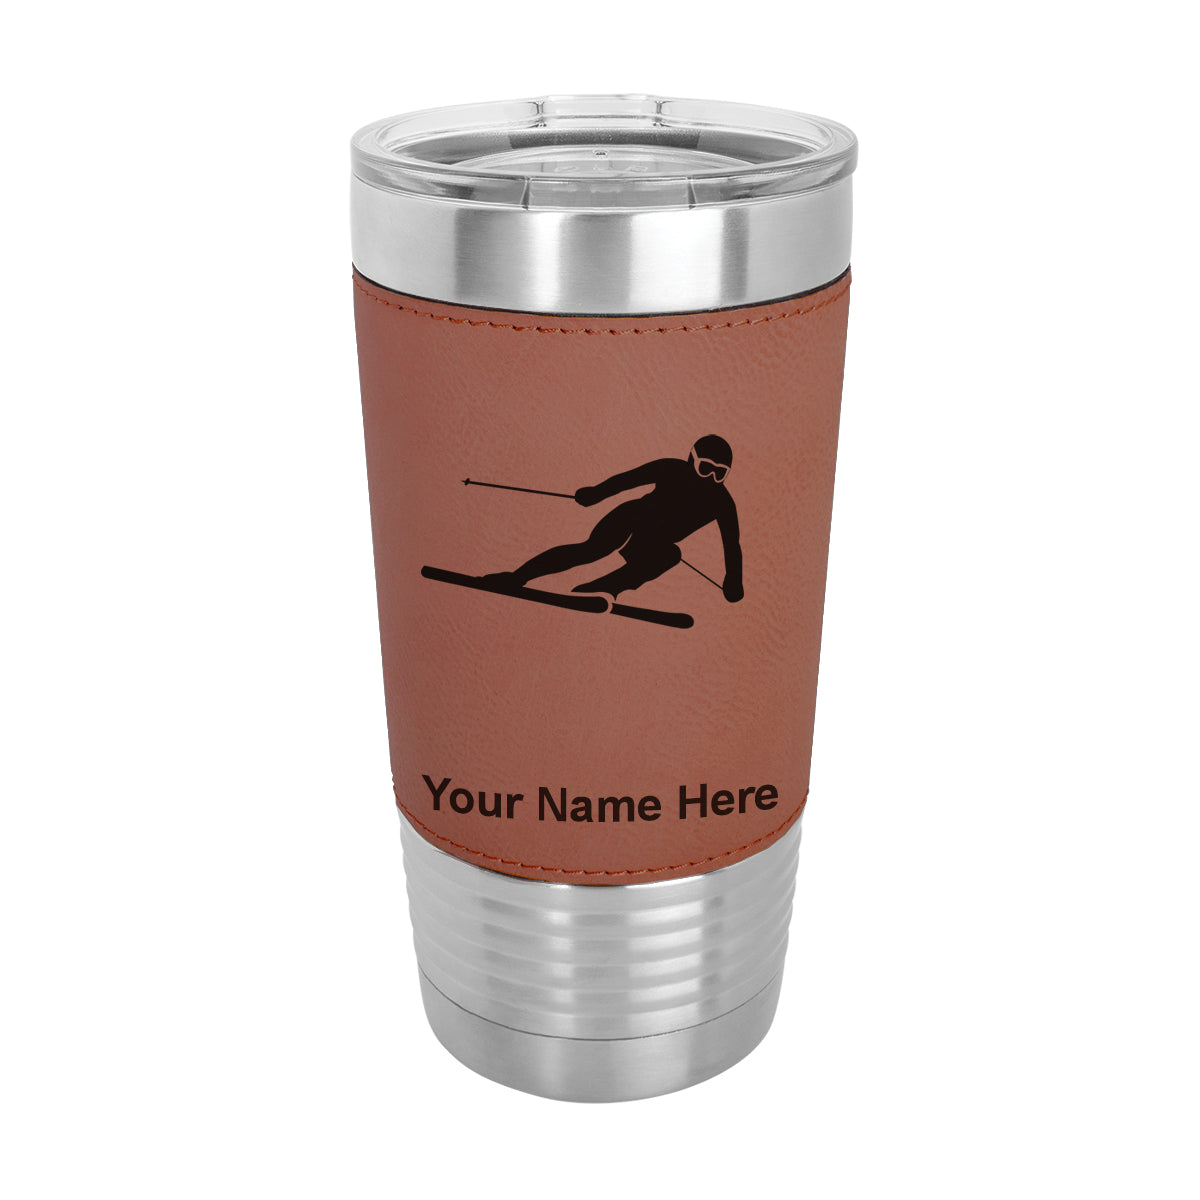 20oz Faux Leather Tumbler Mug, Skier Downhill, Personalized Engraving Included - LaserGram Custom Engraved Gifts